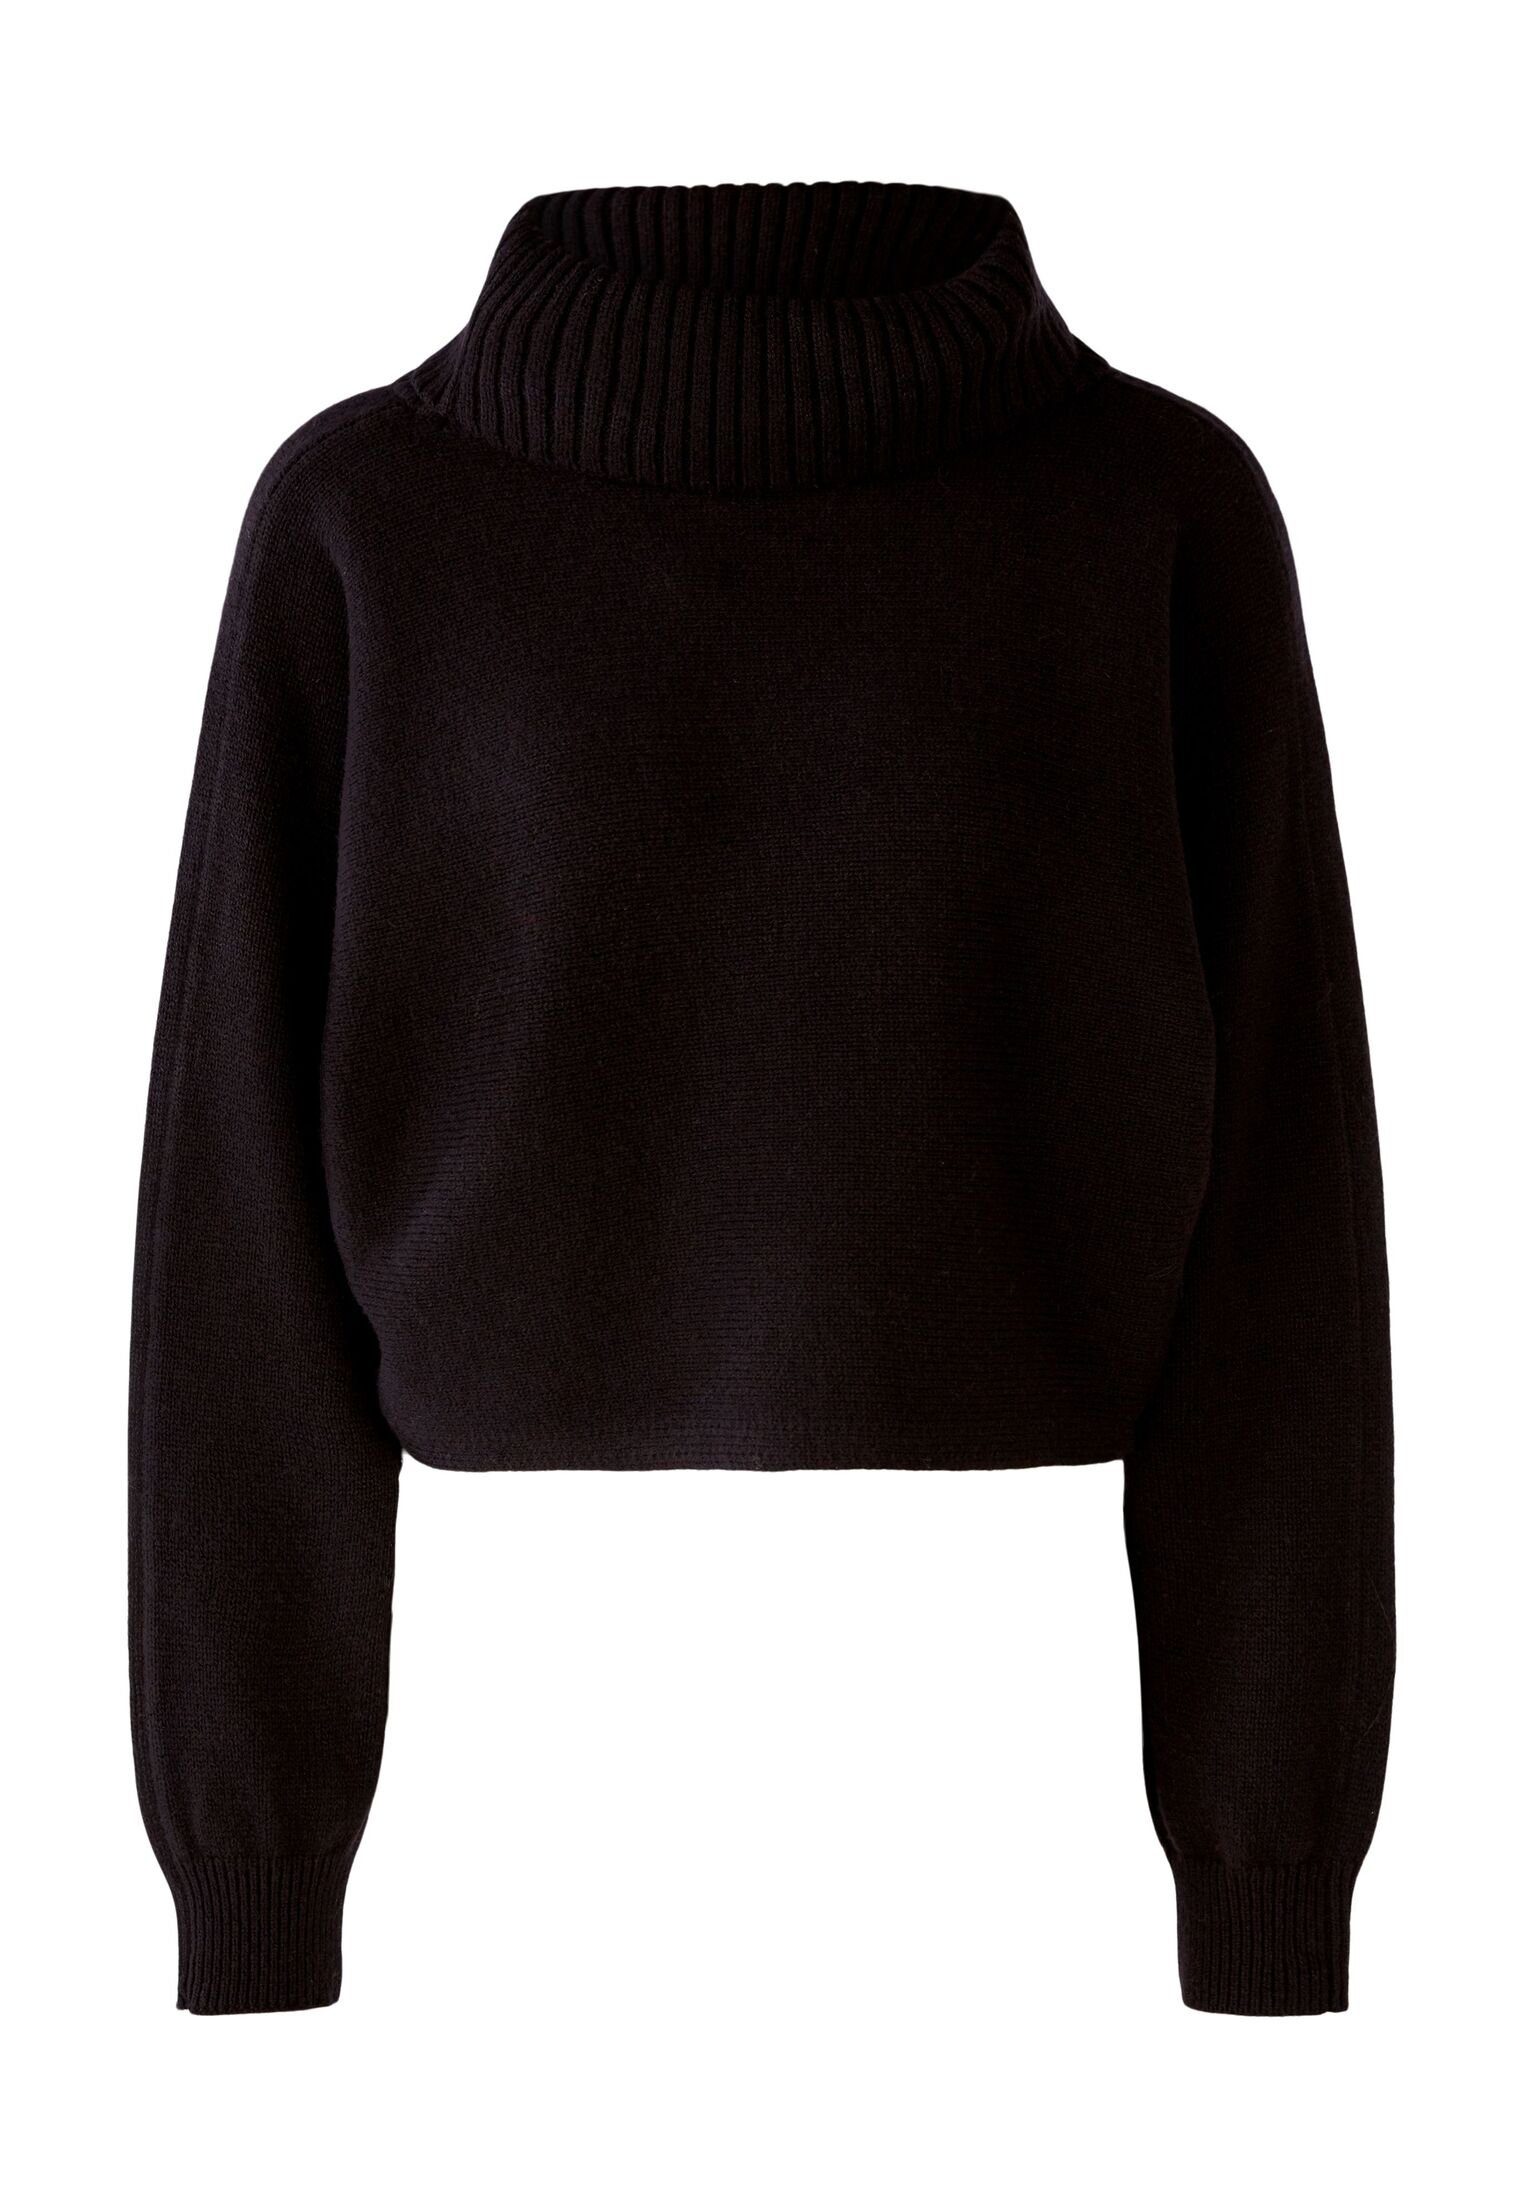 Oui Strickpullover Pullover Wollmischung black